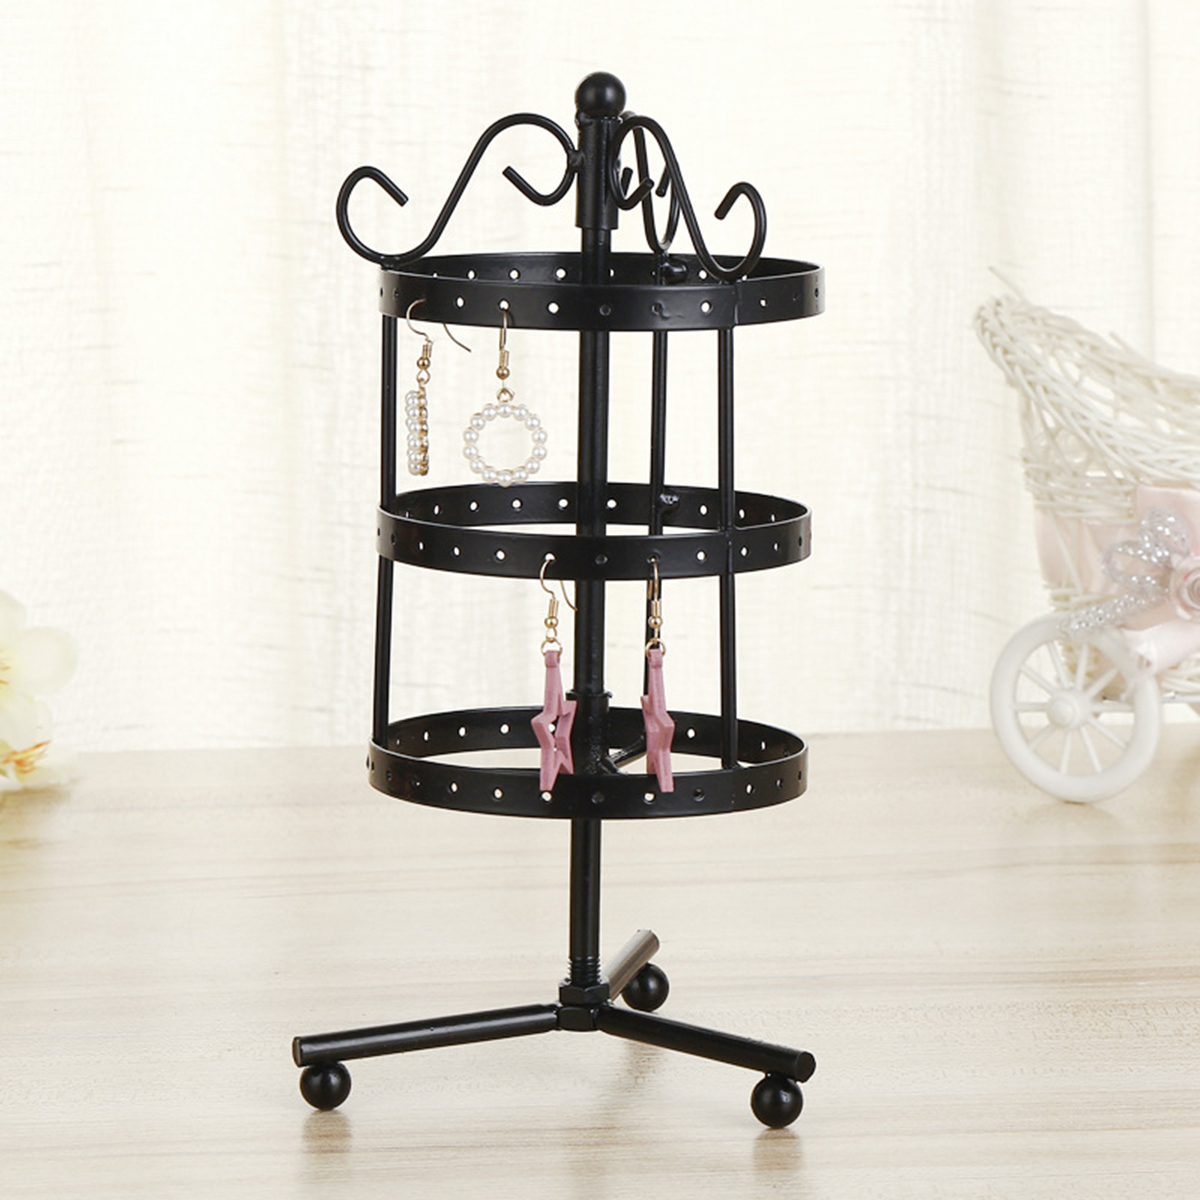 81-Holes-3-tiers-Rotating-Iron-Jewelry-Rack-Earrings-Rings-Display-Stand-Tools-Kit-1590310-2